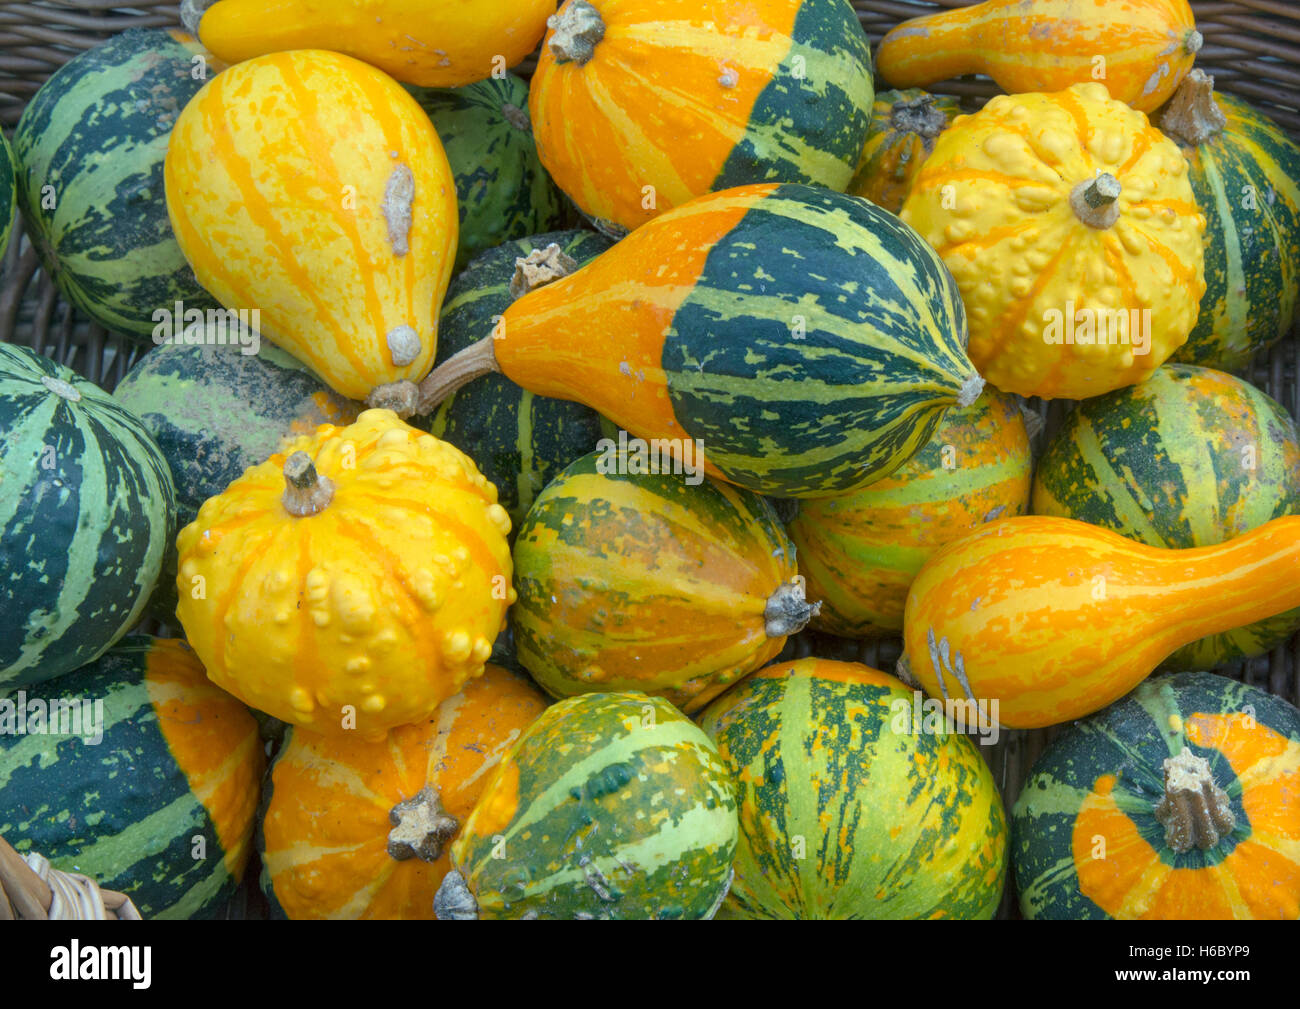 Mixed squashes on display in a wicker basket Stock Photo